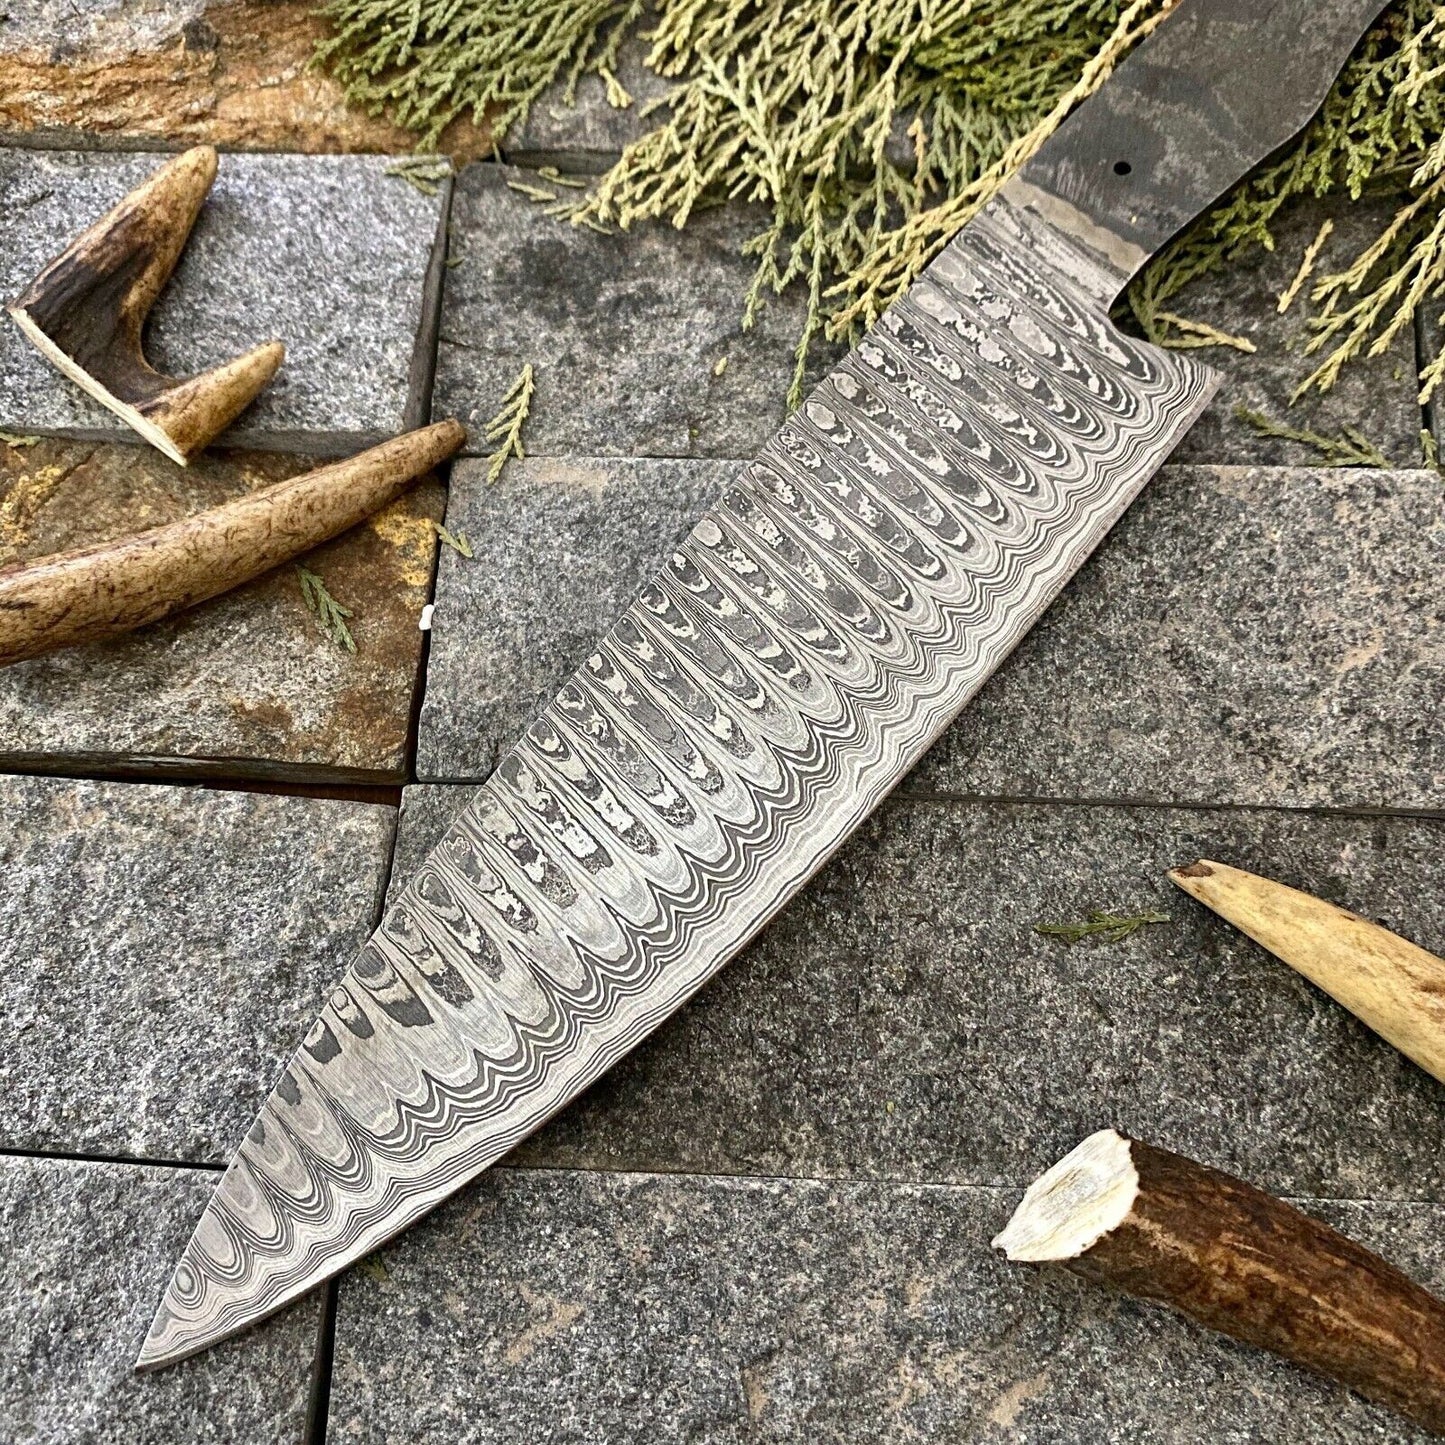 12”CUSTOM HAND FORGED Damascus Steel Chef knife Blank Blade Knife Making Supply